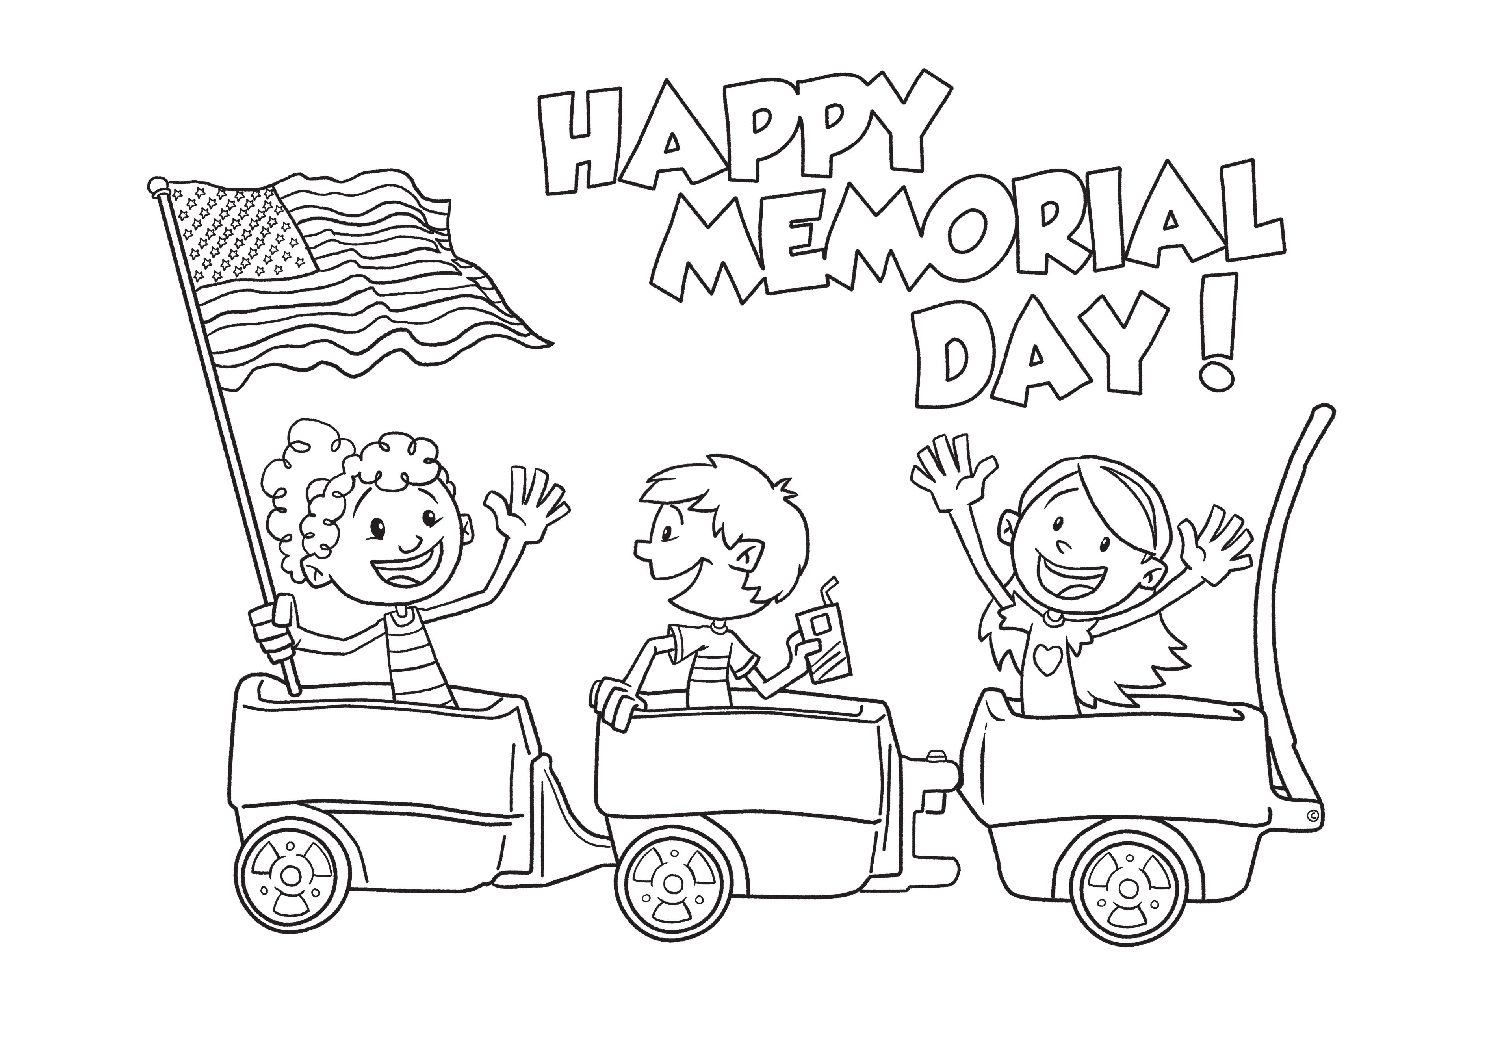 Happy Memorial Day Coloring Page Free Printable Coloring Pages for Kids